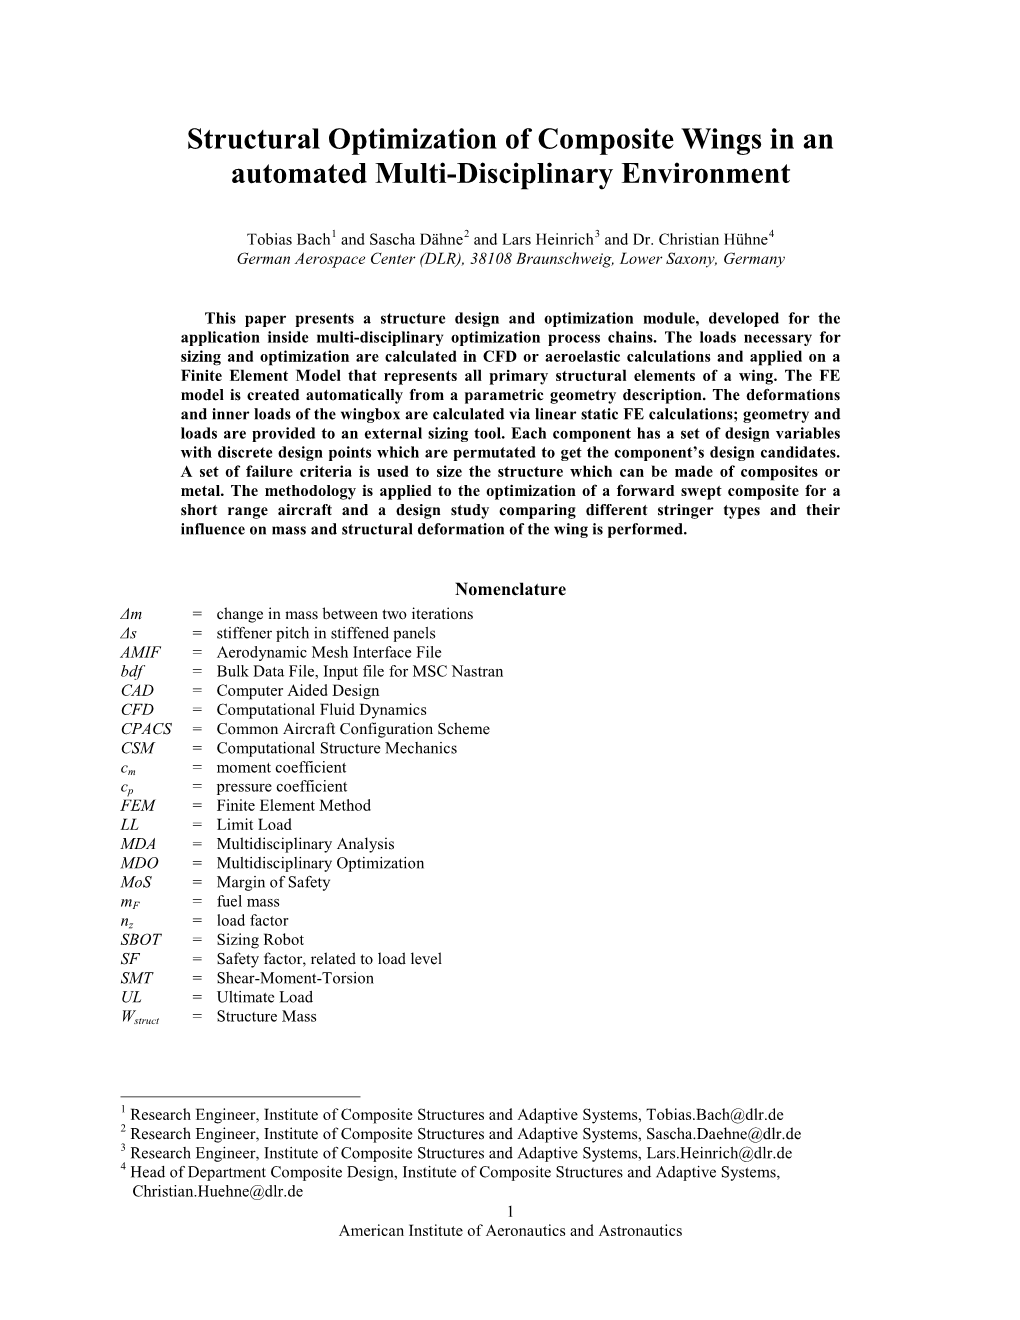 Structural Optimization of Composite Wings in an Automated Multi-Disciplinary Environment